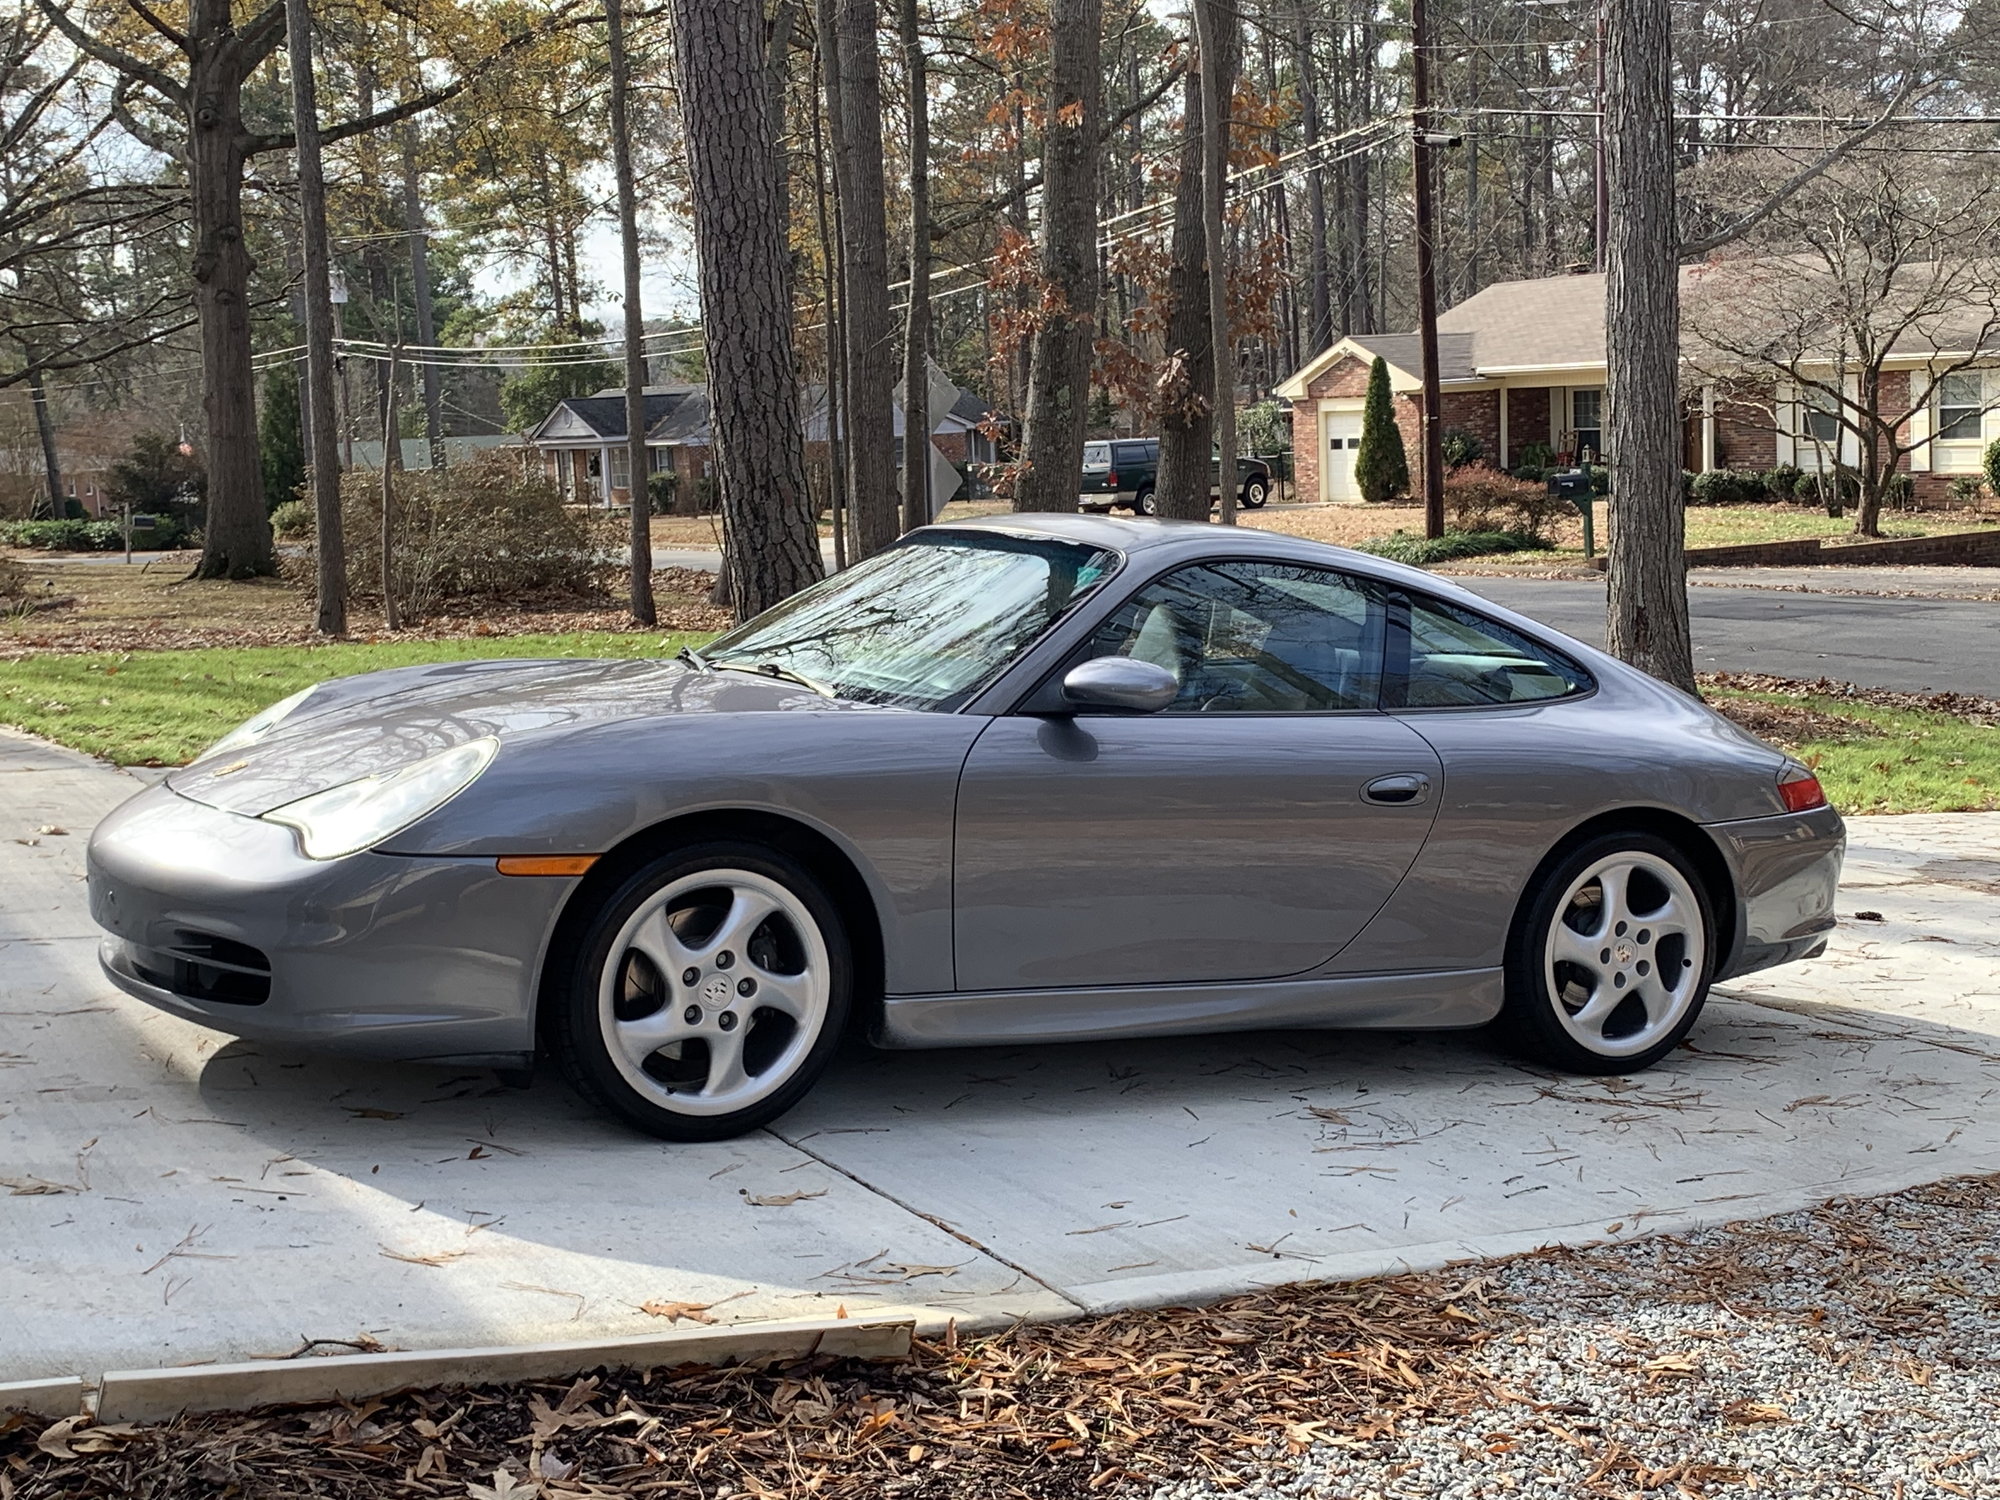 2002 Porsche 911 - 2002 Porsche 911 Carrera 2 Seal Grey with Graphite Grey interior - Used - VIN WP0AA29902S621468 - 90,000 Miles - 6 cyl - 2WD - Manual - Coupe - Gray - Raleigh, NC 27529, United States